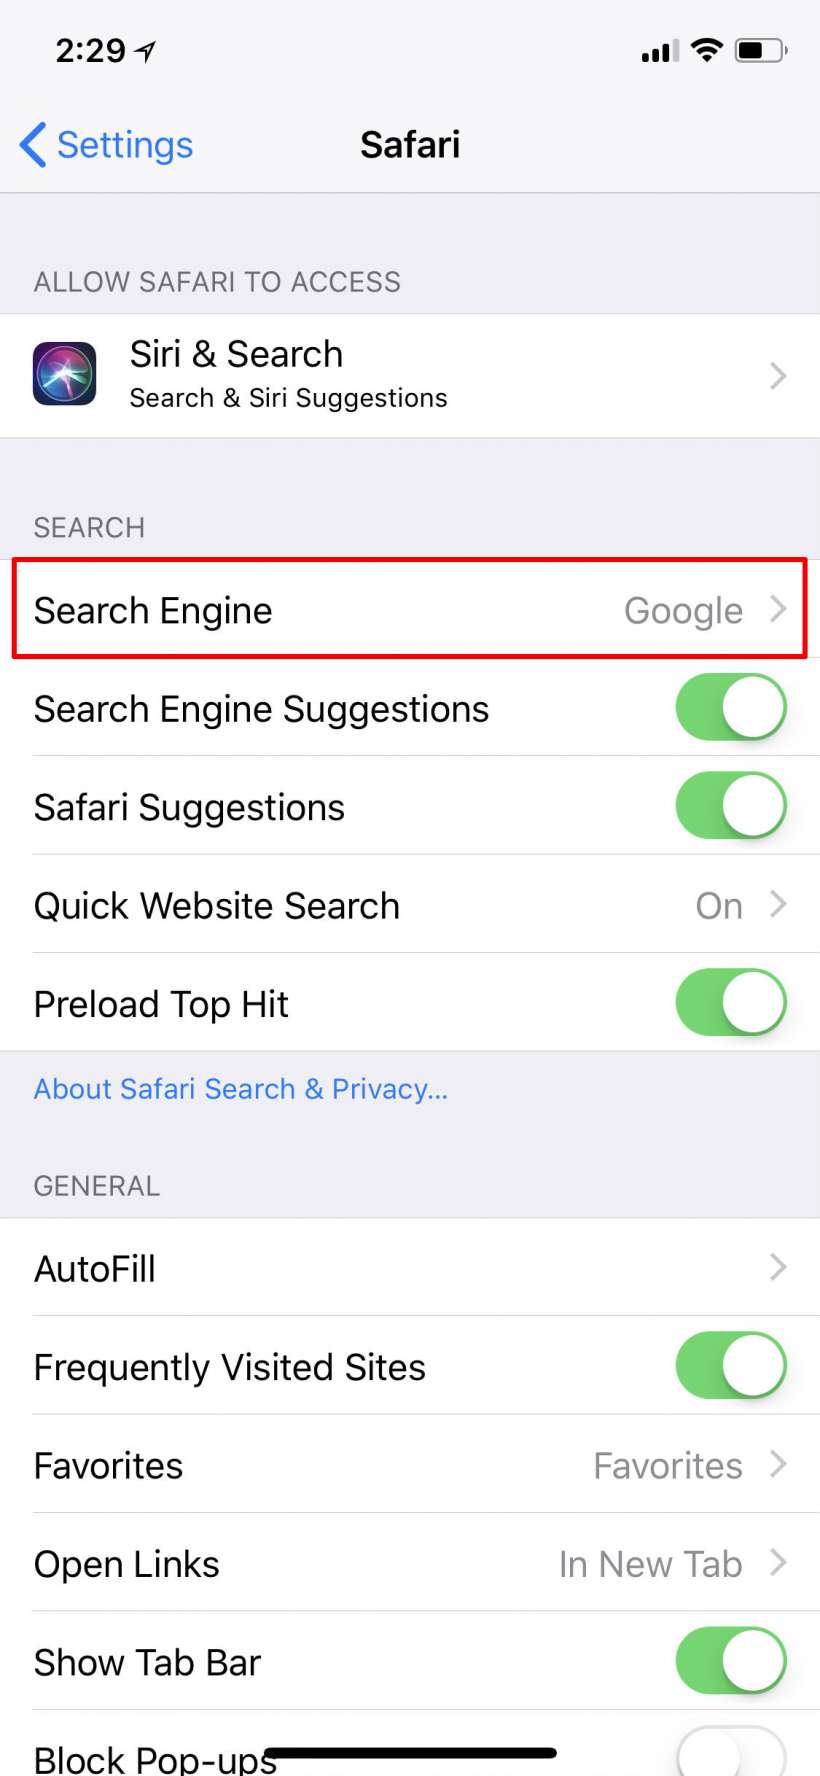 How to set Safari's default search engine to Google, Yahoo, Bing or DuckDuckGo on iPhone and iPad.